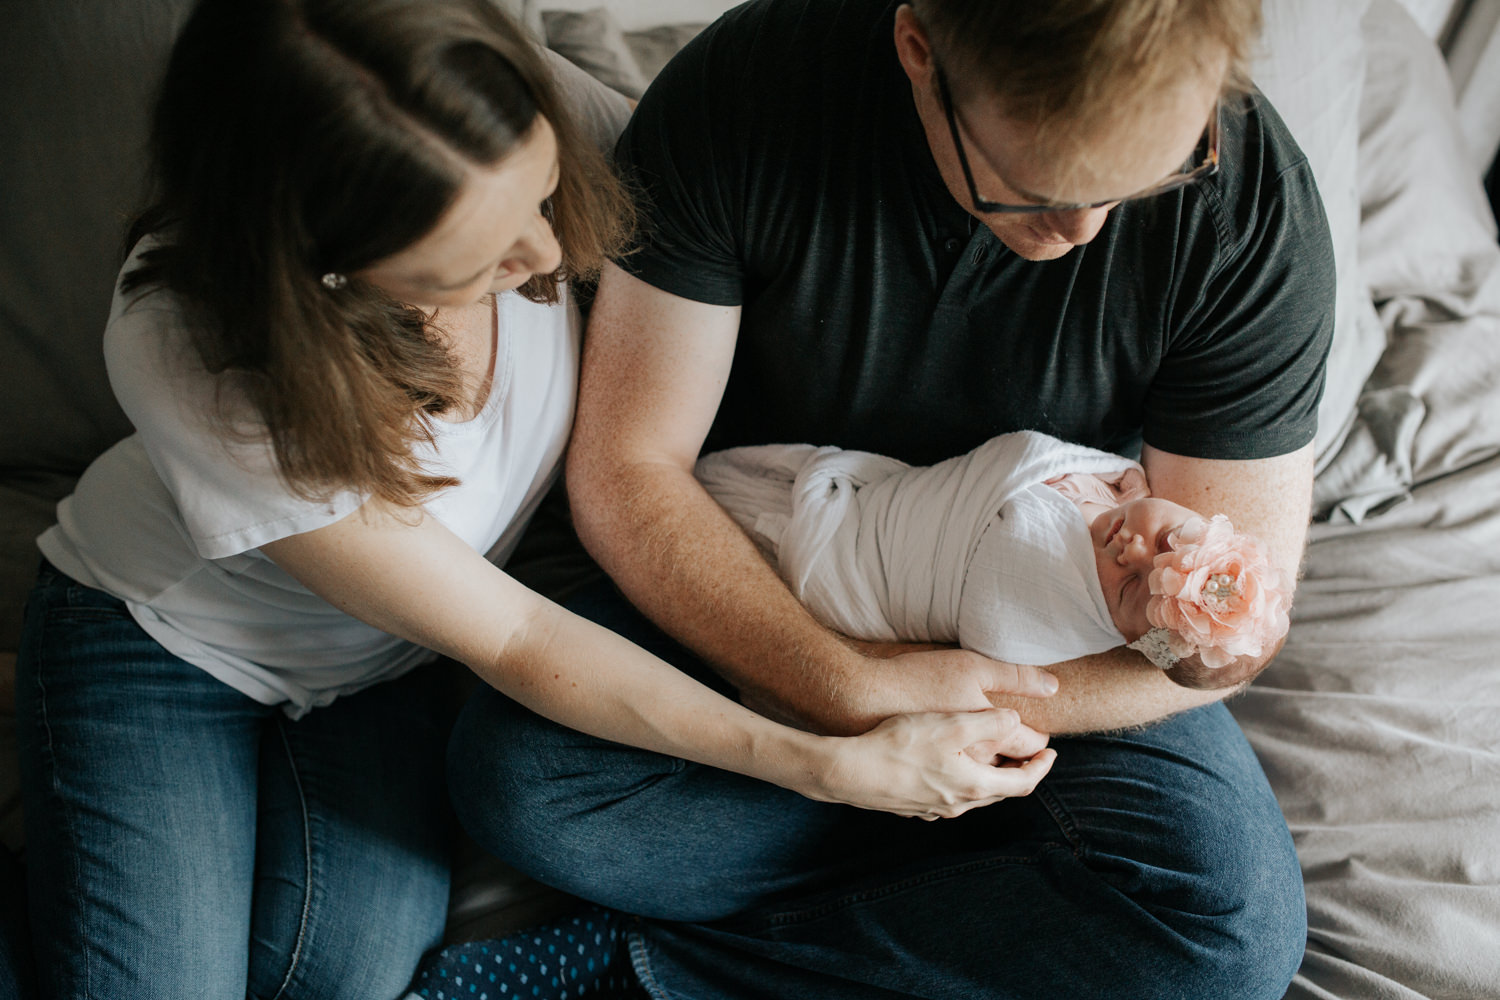 family of 3, new parents sitting on bed, dad holding 2 week old swaddled baby girl as mom snuggles next to husband smiling at daughter - Stouffville Lifestyle Photography